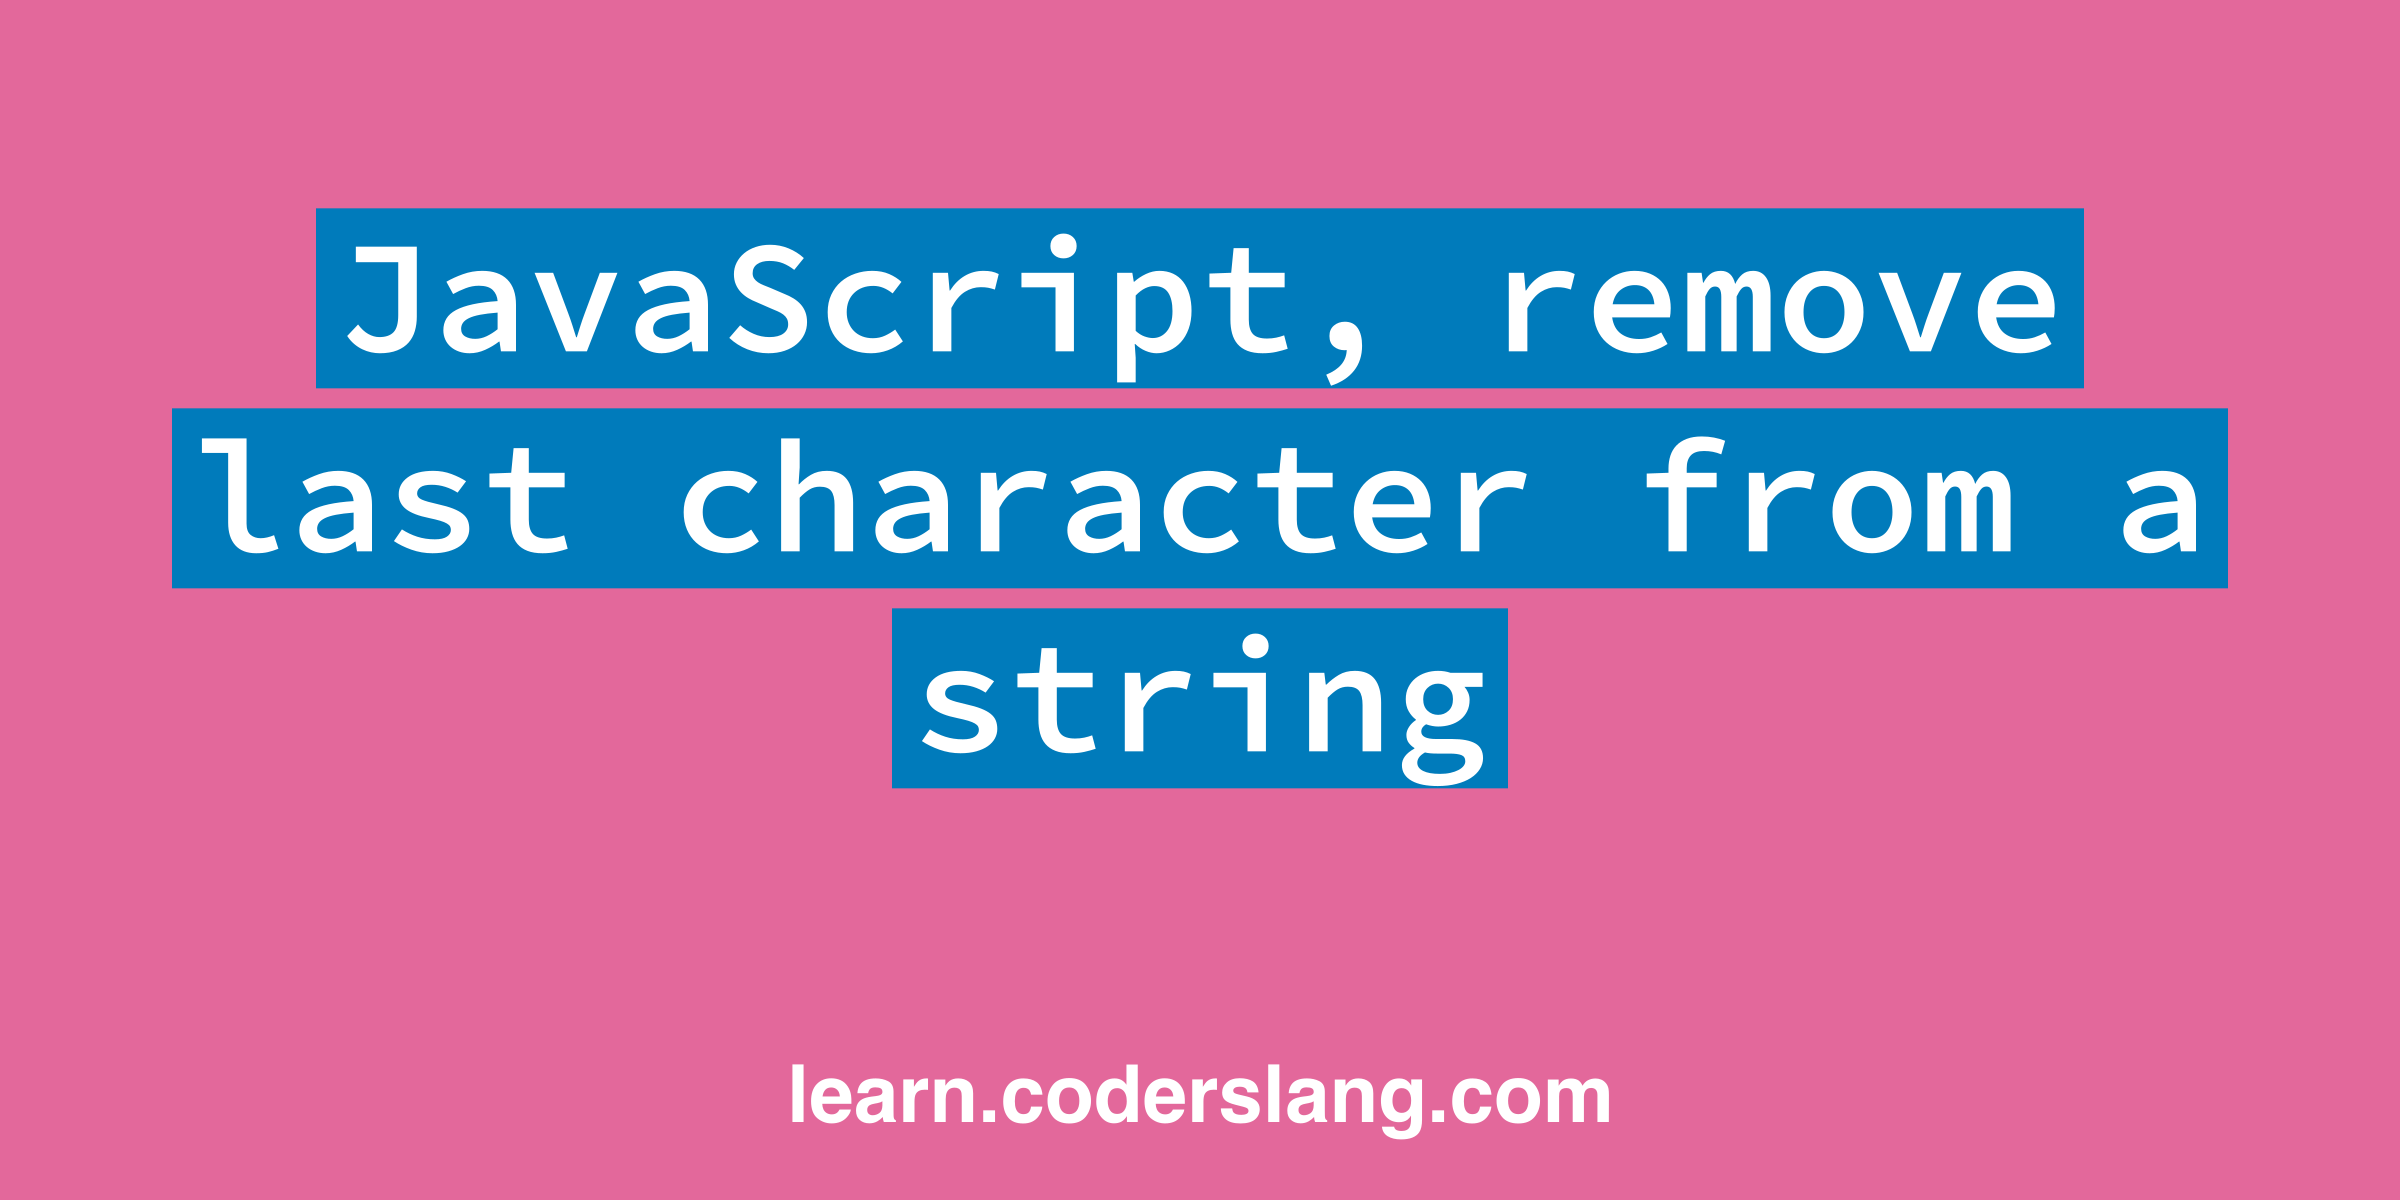 JavaScript, remove last character from a string